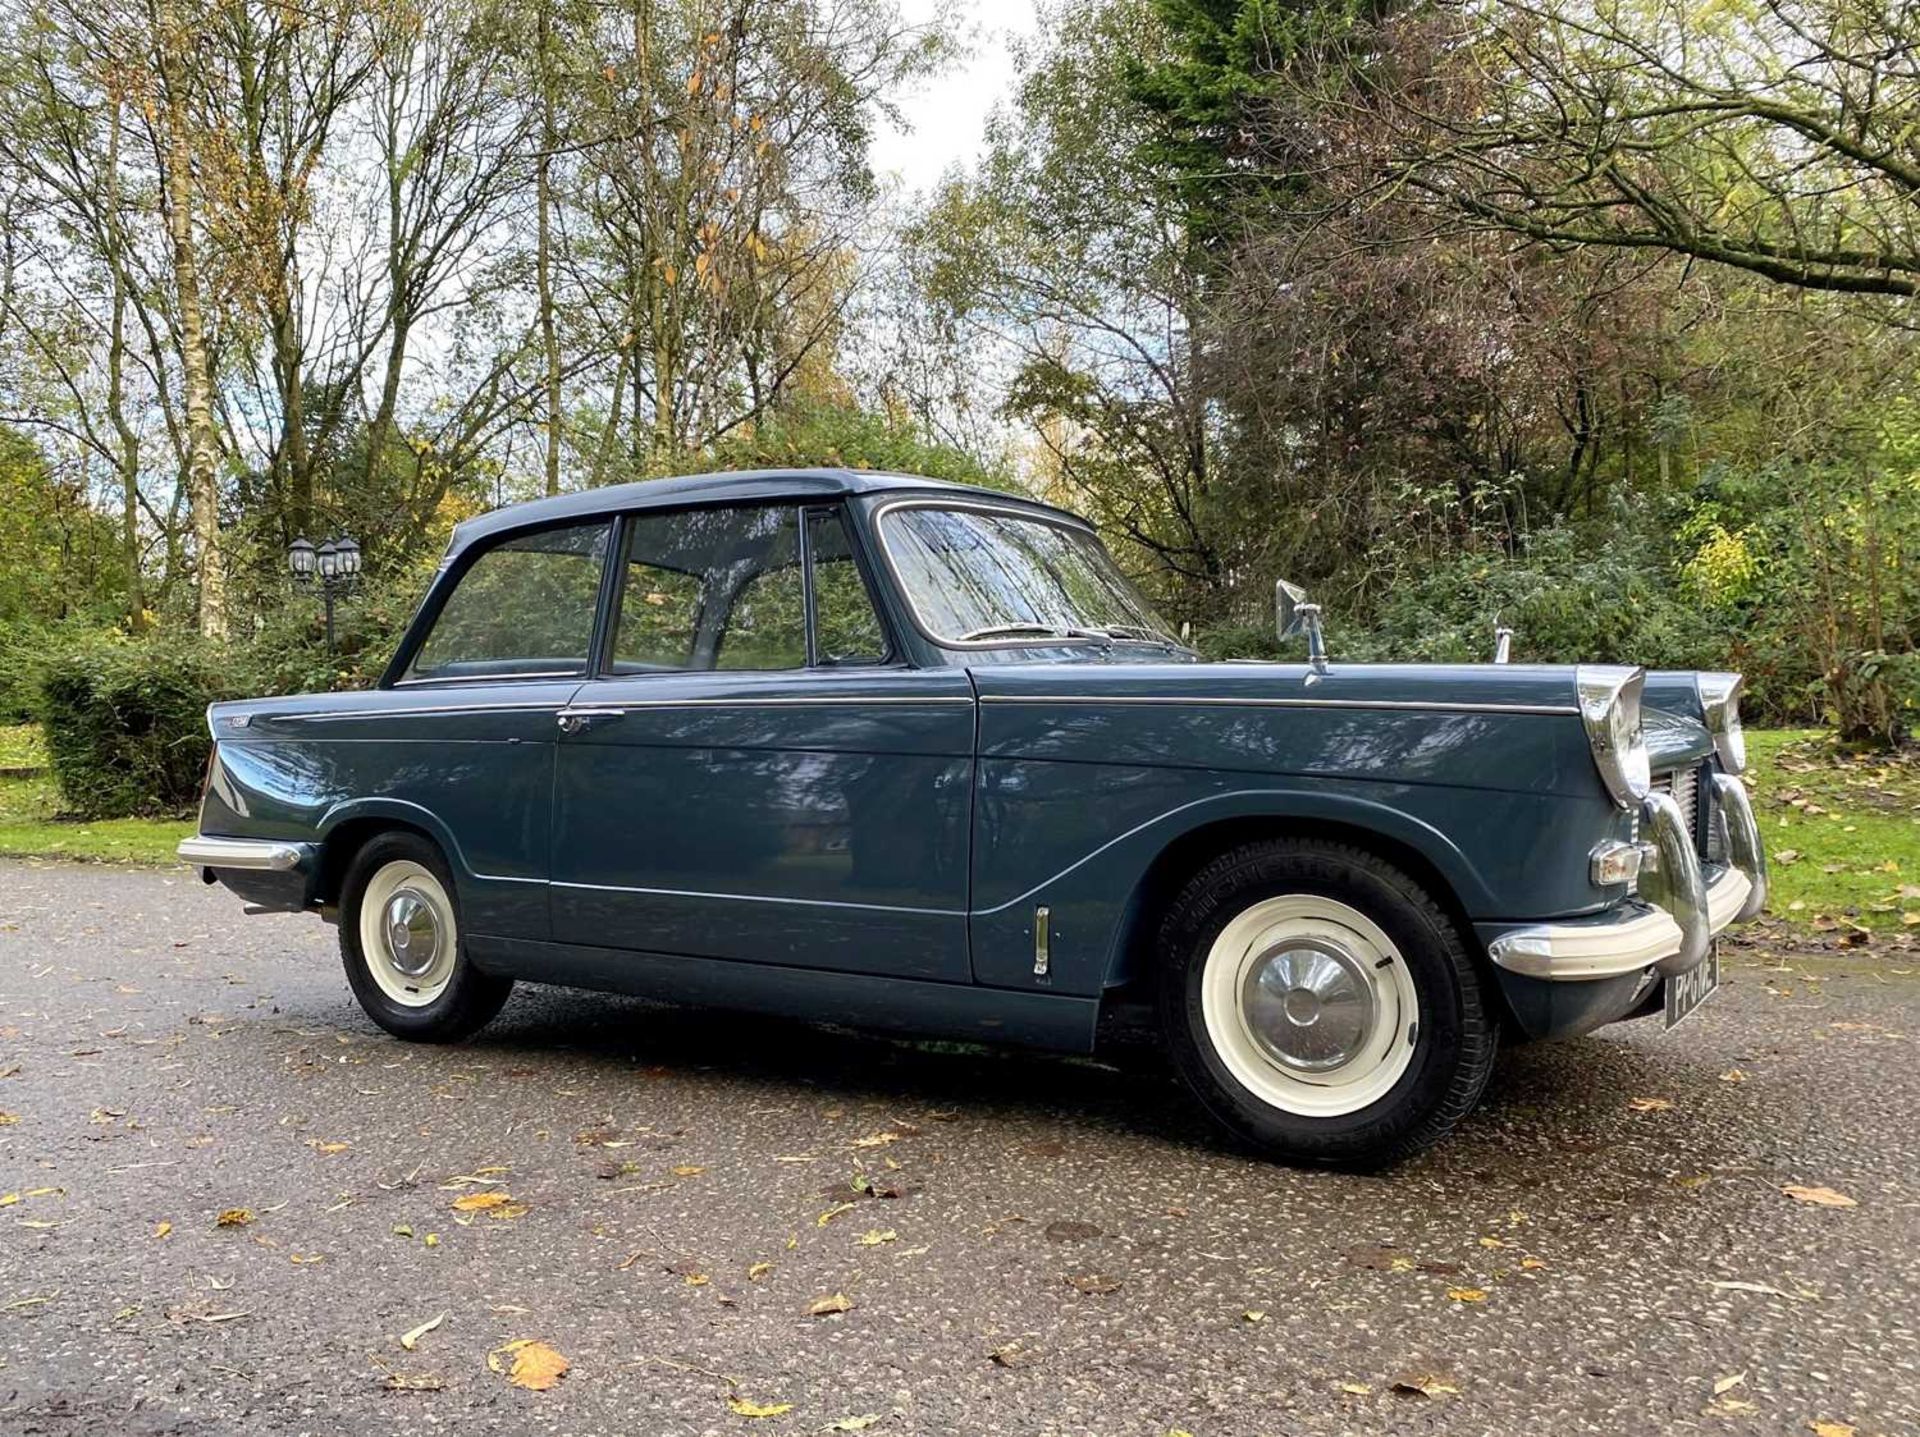 1967 Triumph Herald 12/50 *** NO RESERVE *** Subject to an extensive restoration - Image 9 of 97